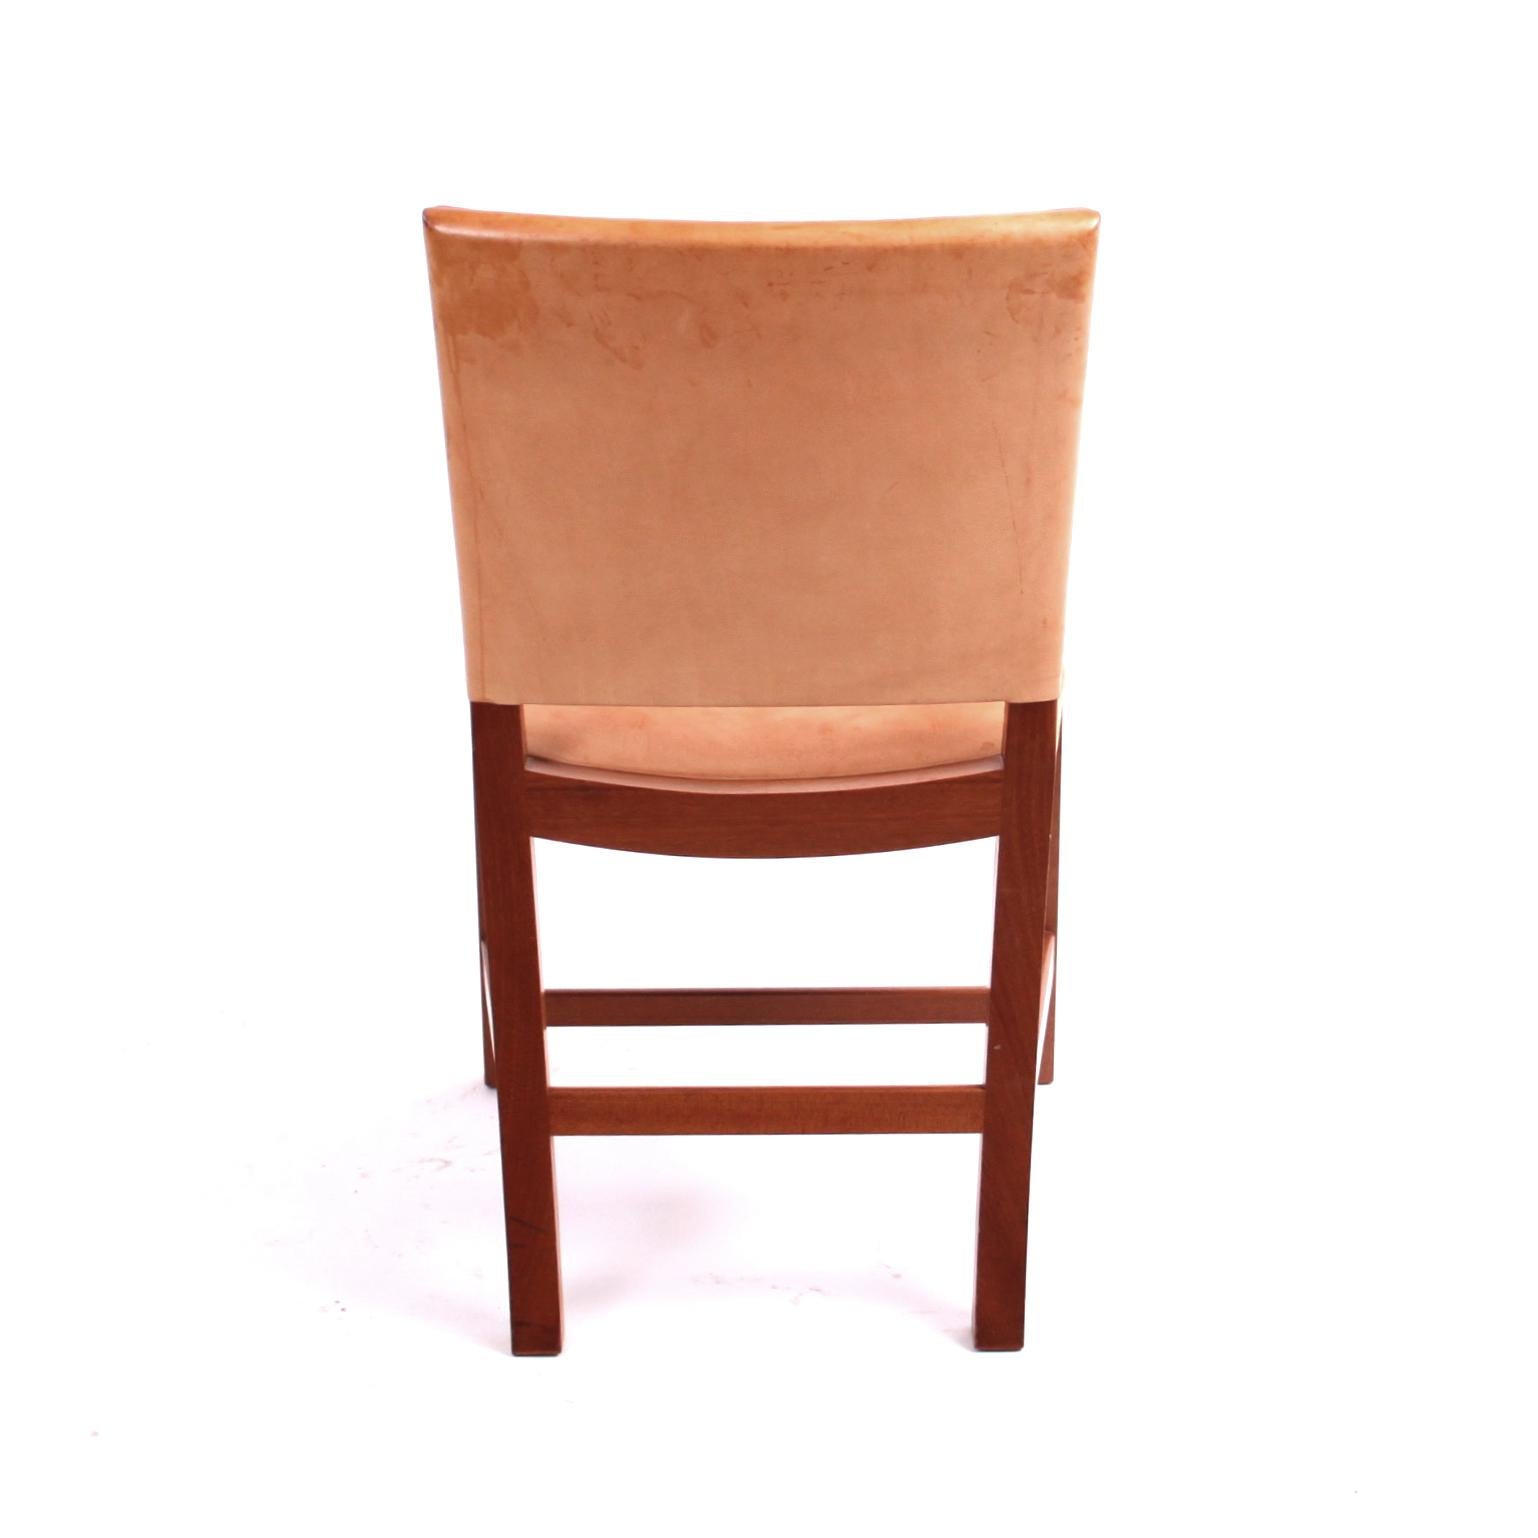 Mid-Century Modern Kaare Klint “Red Chair” in Patinated Natural Leather with Piping